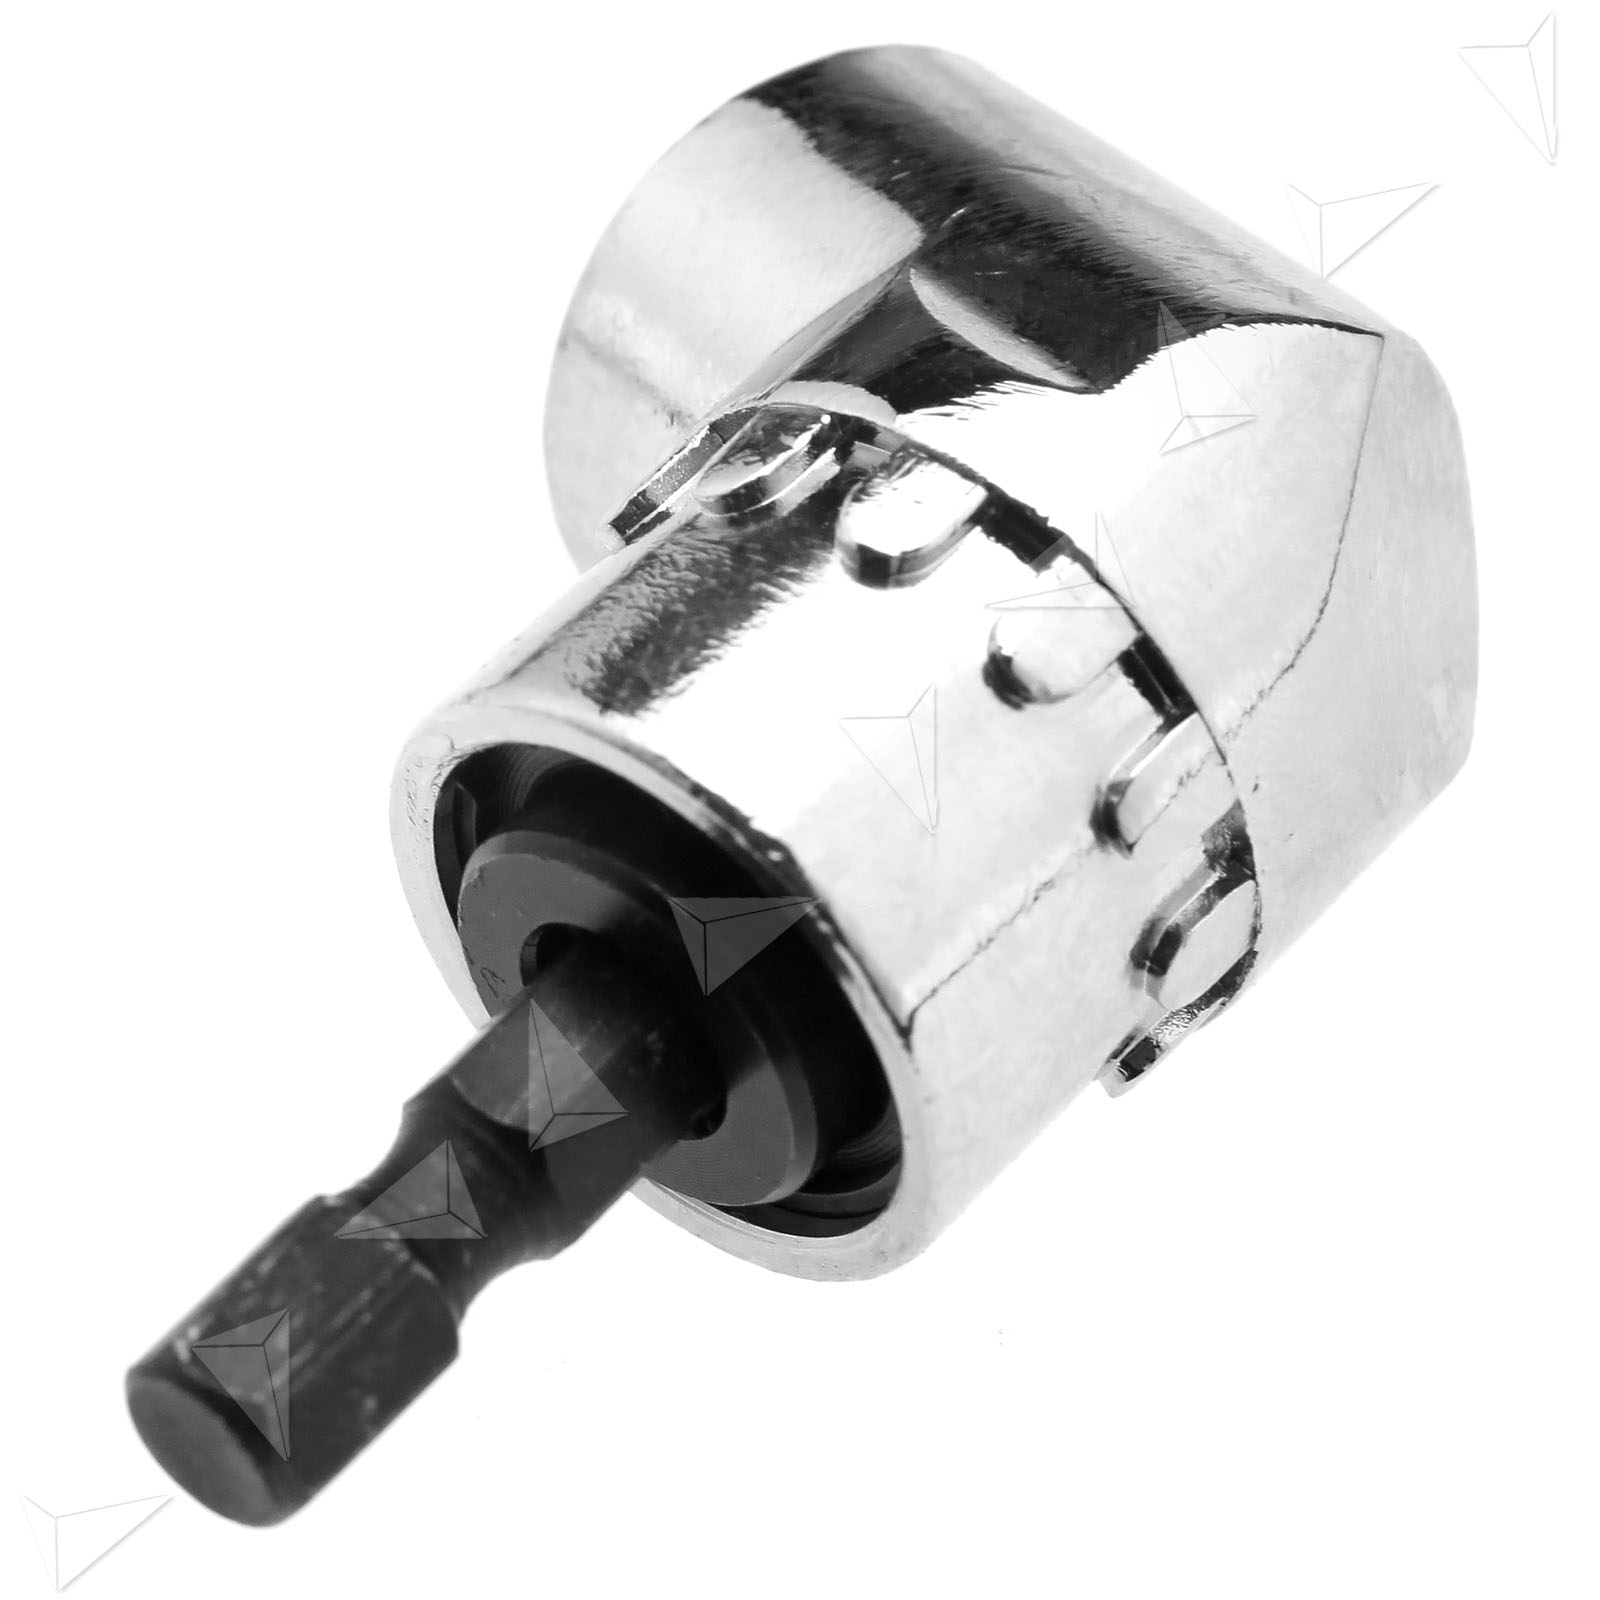 New 105°Angle Extension Drill Bit Fit for 1/4" 6mm Hex Drill Bit